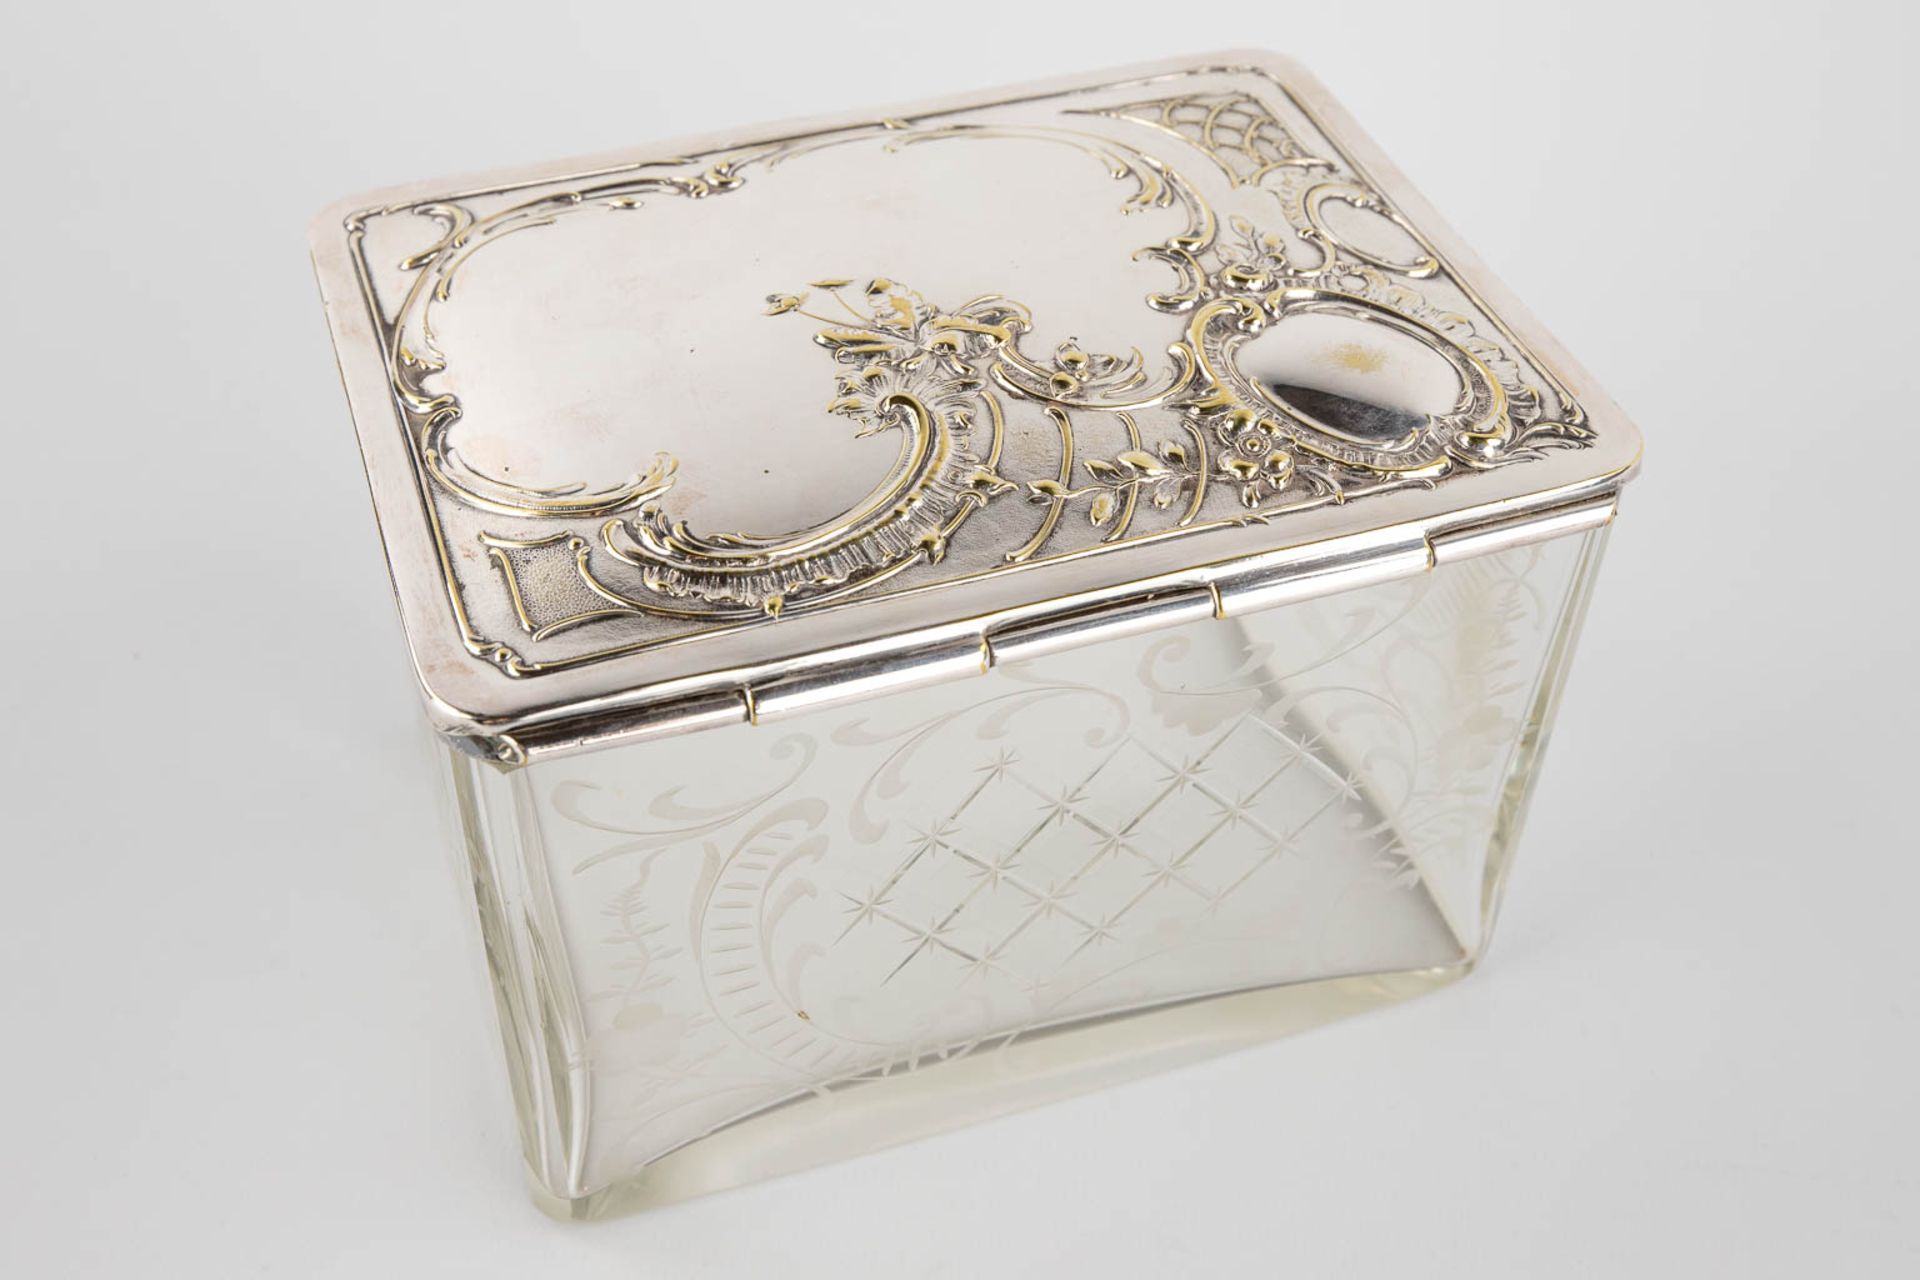 Four silver-plated storage boxes, ice-pails. (H:27 x D:20 cm) - Image 20 of 20